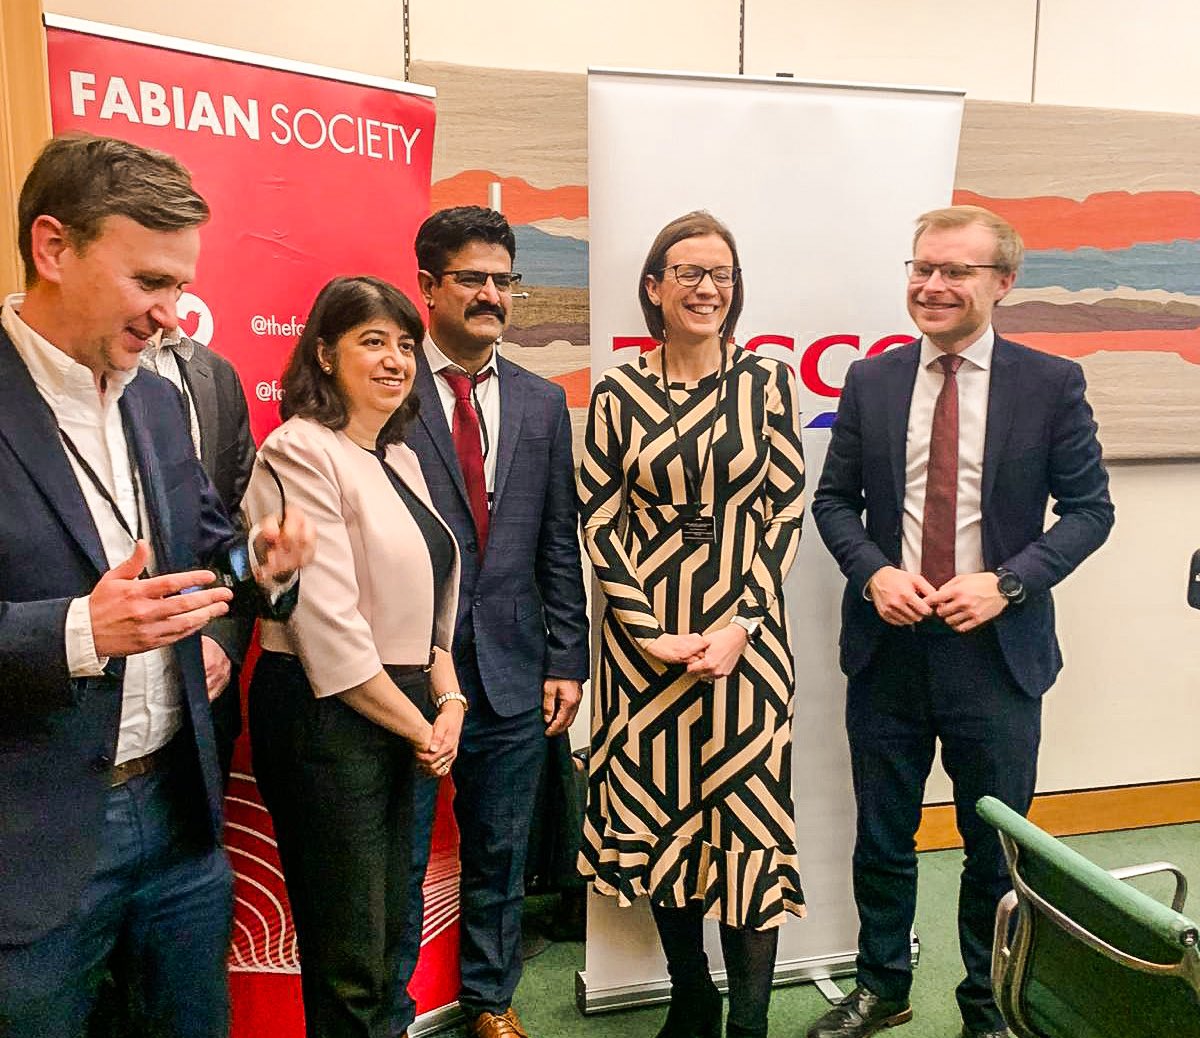 Really positive round table hosted by @thefabians this morning with representatives from @Tesco discussing the future of skills across the UK and making the apprenticeship levy work for people and industry.